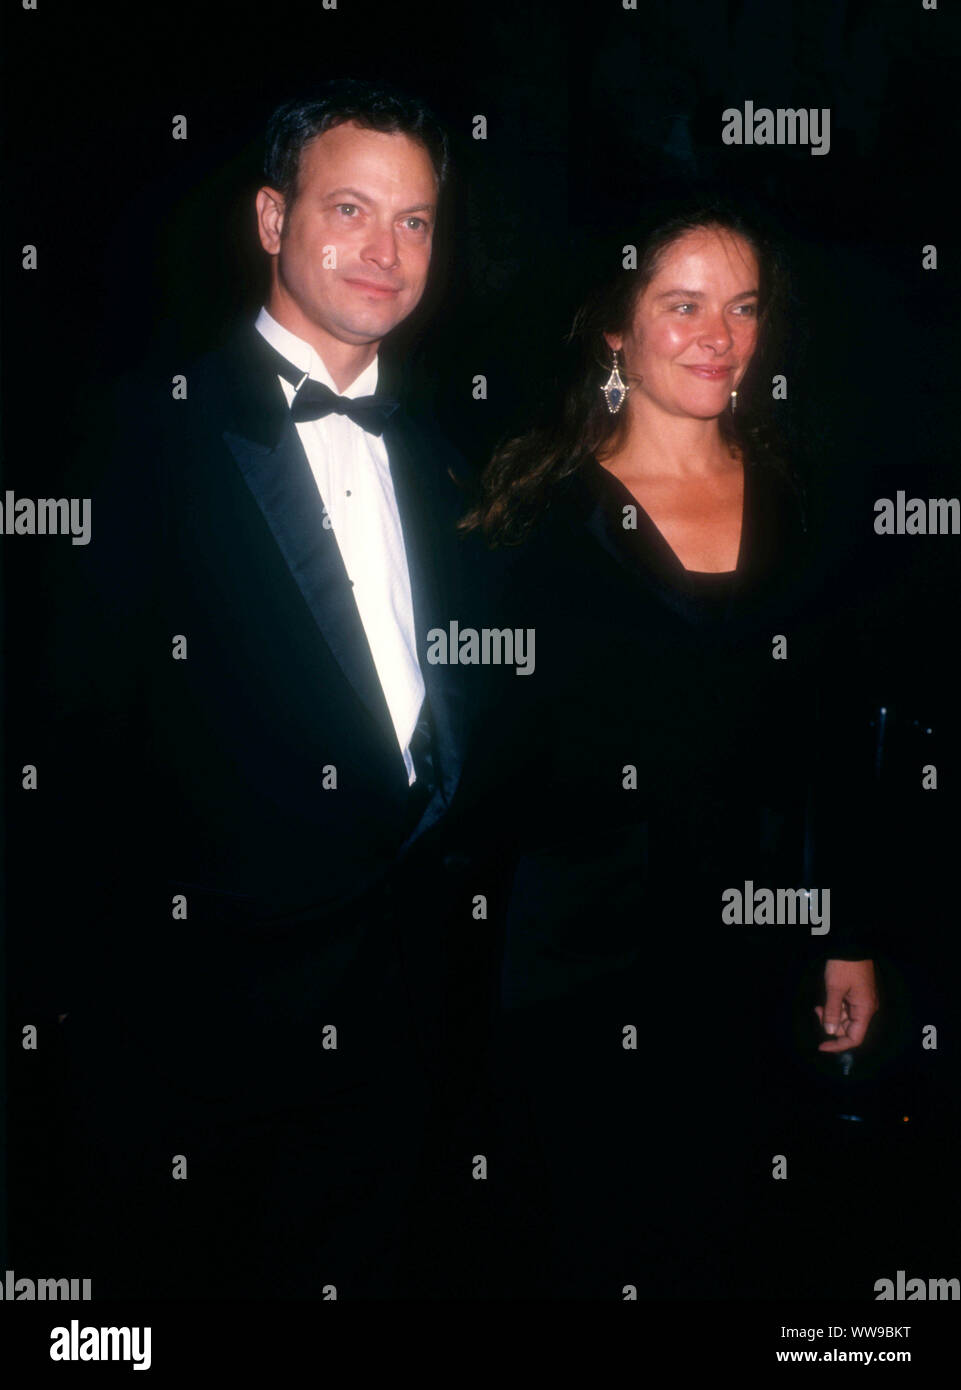 Century City, California, USA 7th December 1994 Actor Gary Sinise and wife Moira Harris attend the Fifth Annual Fire and Ice Ball to Benefit the Revlon/UCLA Women's Cancer Research Program on December 7, 1994 at 20th Century Fox Studios in Century City, California, USA. Photo by Barry King/Alamy Stock Photo Stock Photo